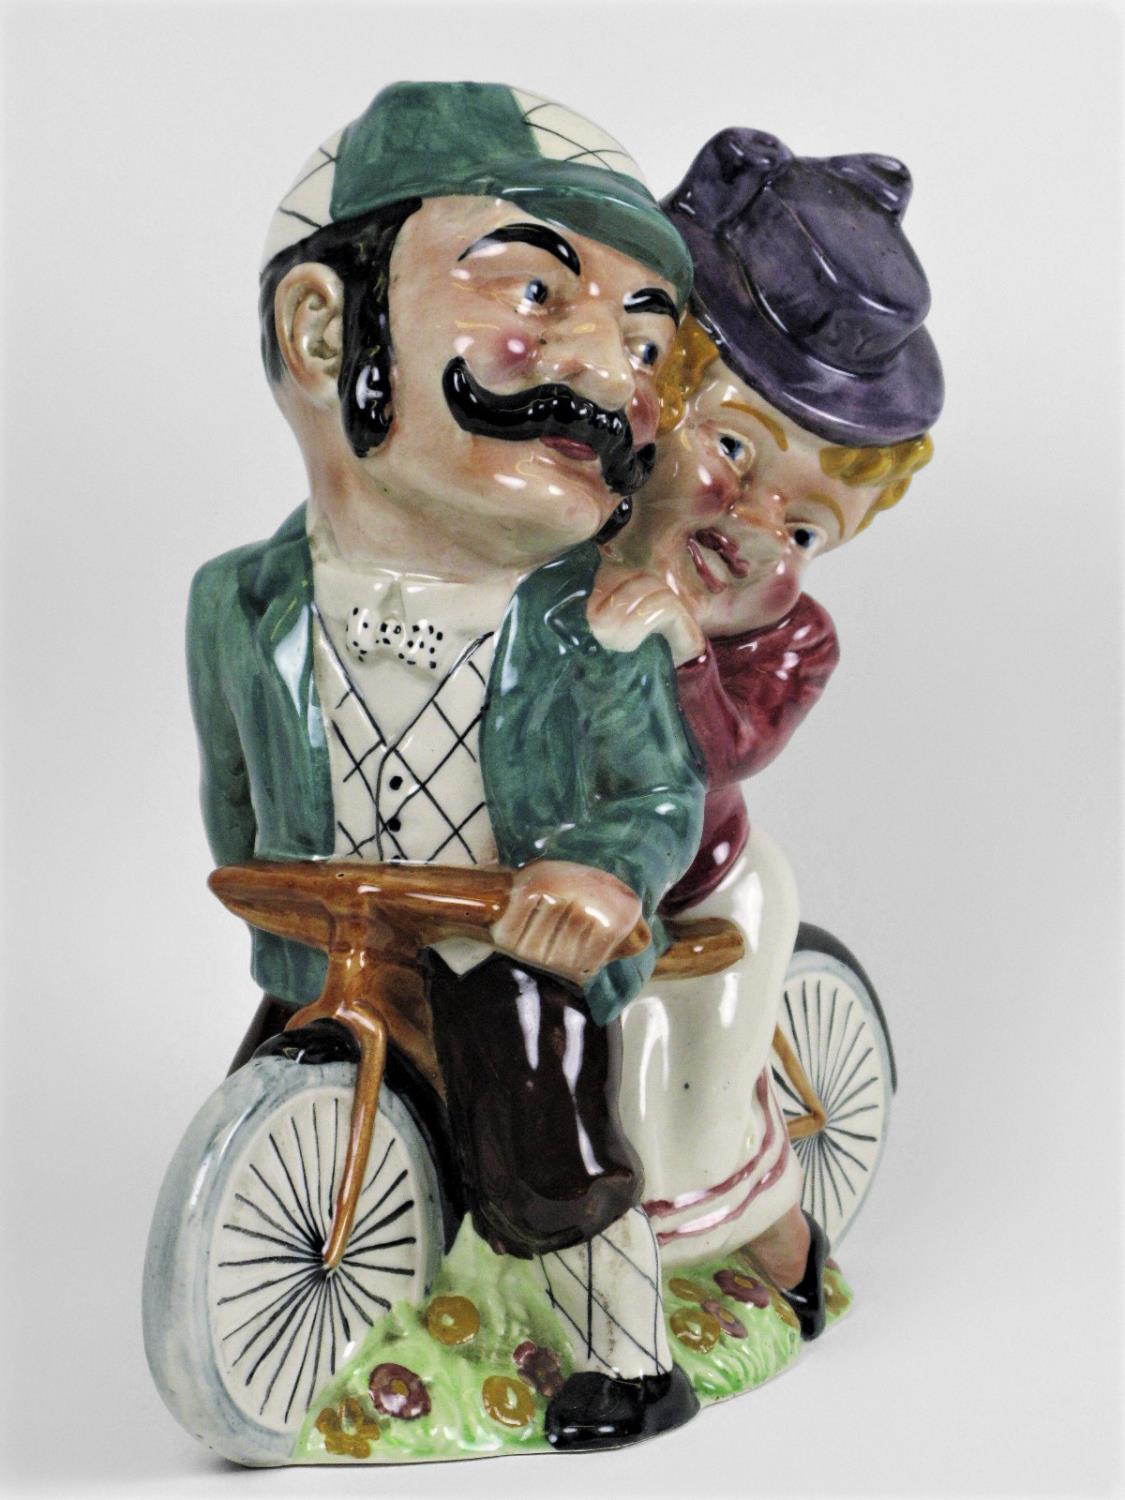 A William Shorter & Son, 'Daisy Bell' Electric Lamp-holder with Daisy and her beau seated on a